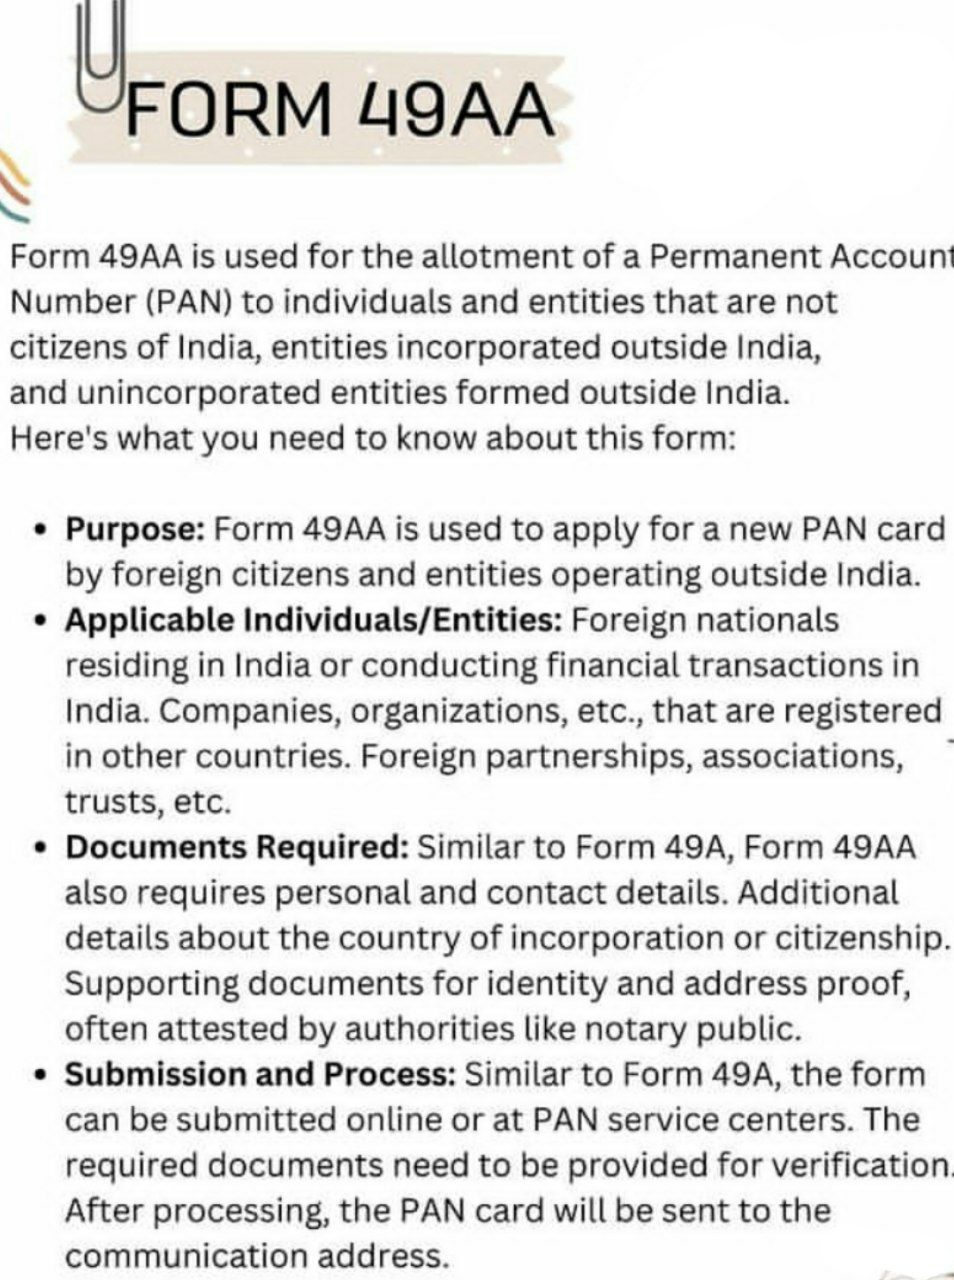 Form 49AA:  Foreign citizens